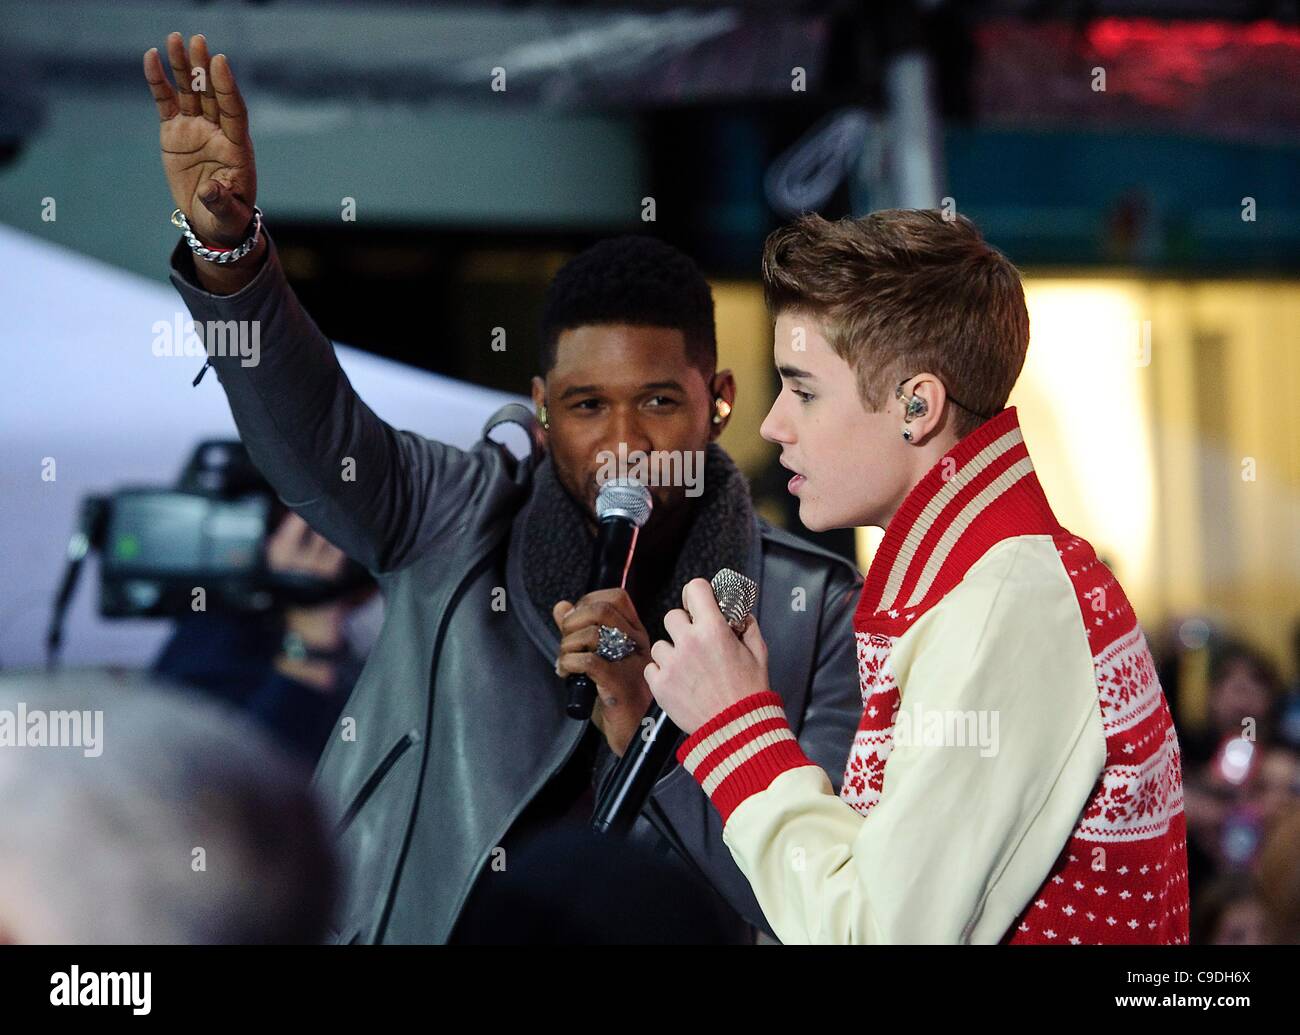 Justin Bieber, Usher on stage for NBC Today Show Concert with Justin Bieber,  Rockefeller Plaza, New York, NY November 23, 2011. Photo By: Lee/Everett  Collection Stock Photo - Alamy